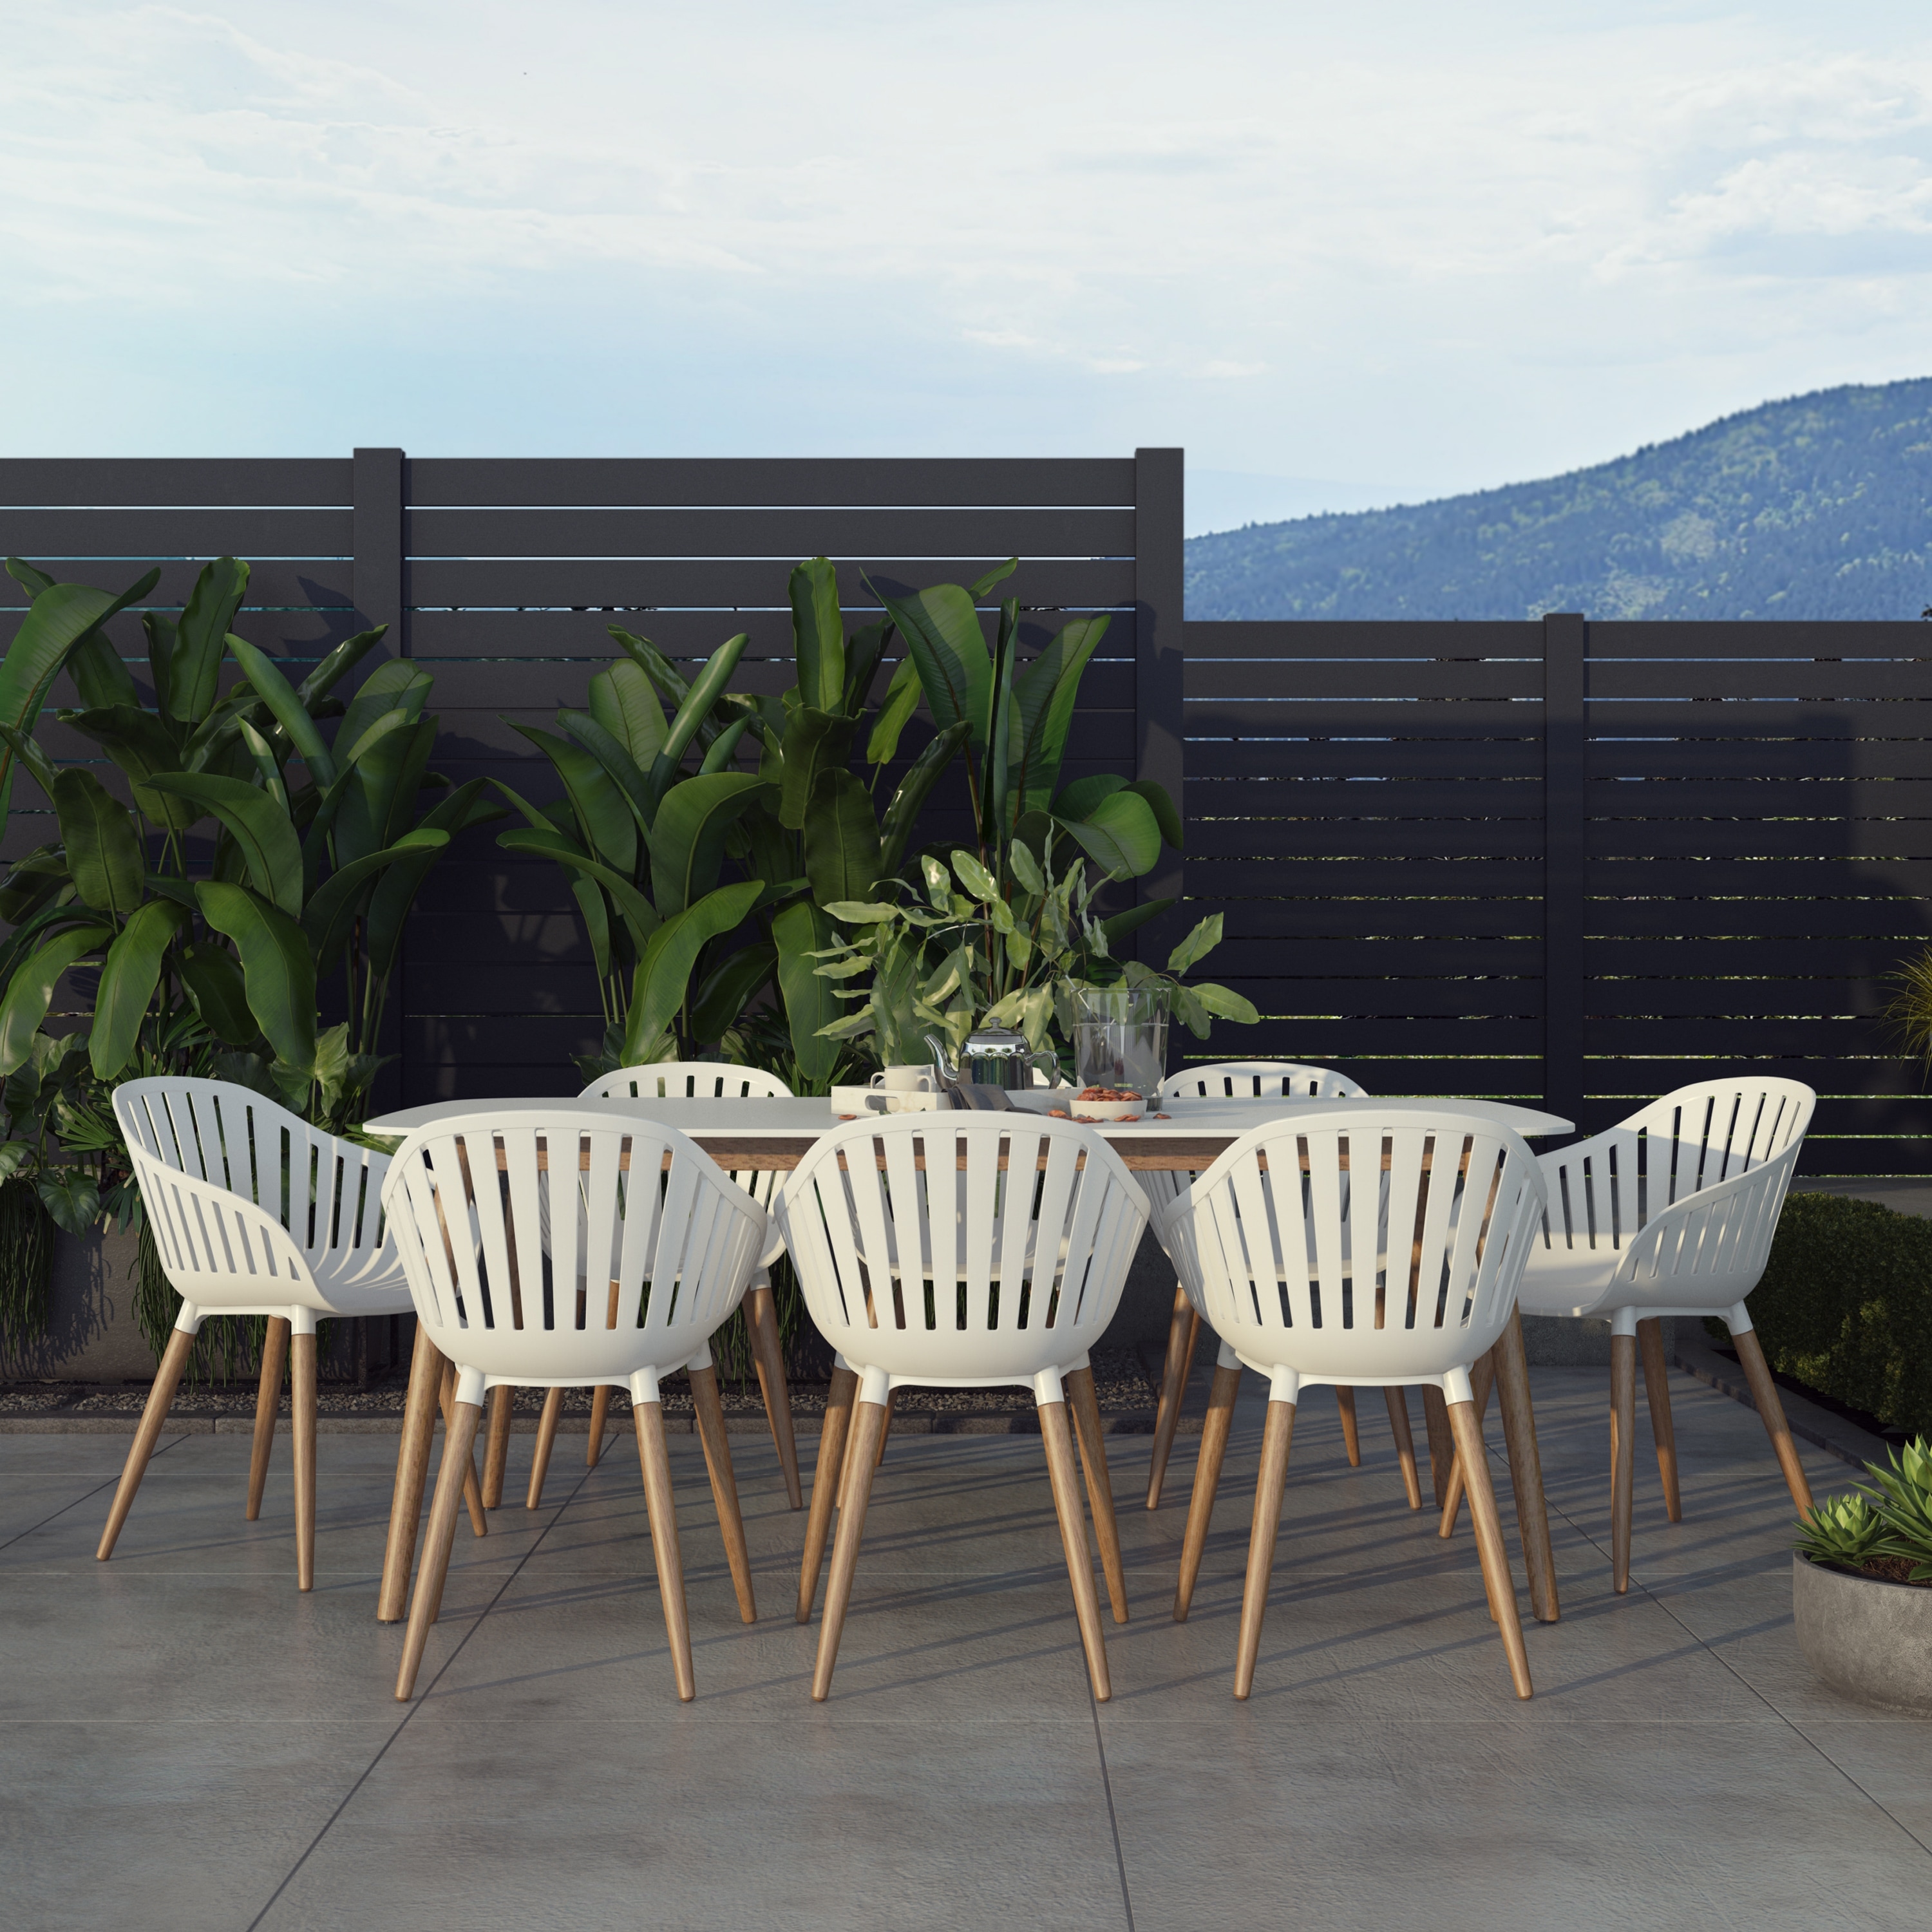 Amazonia Greybool Fsc Certified Wood Outdoor Patio Dining Set